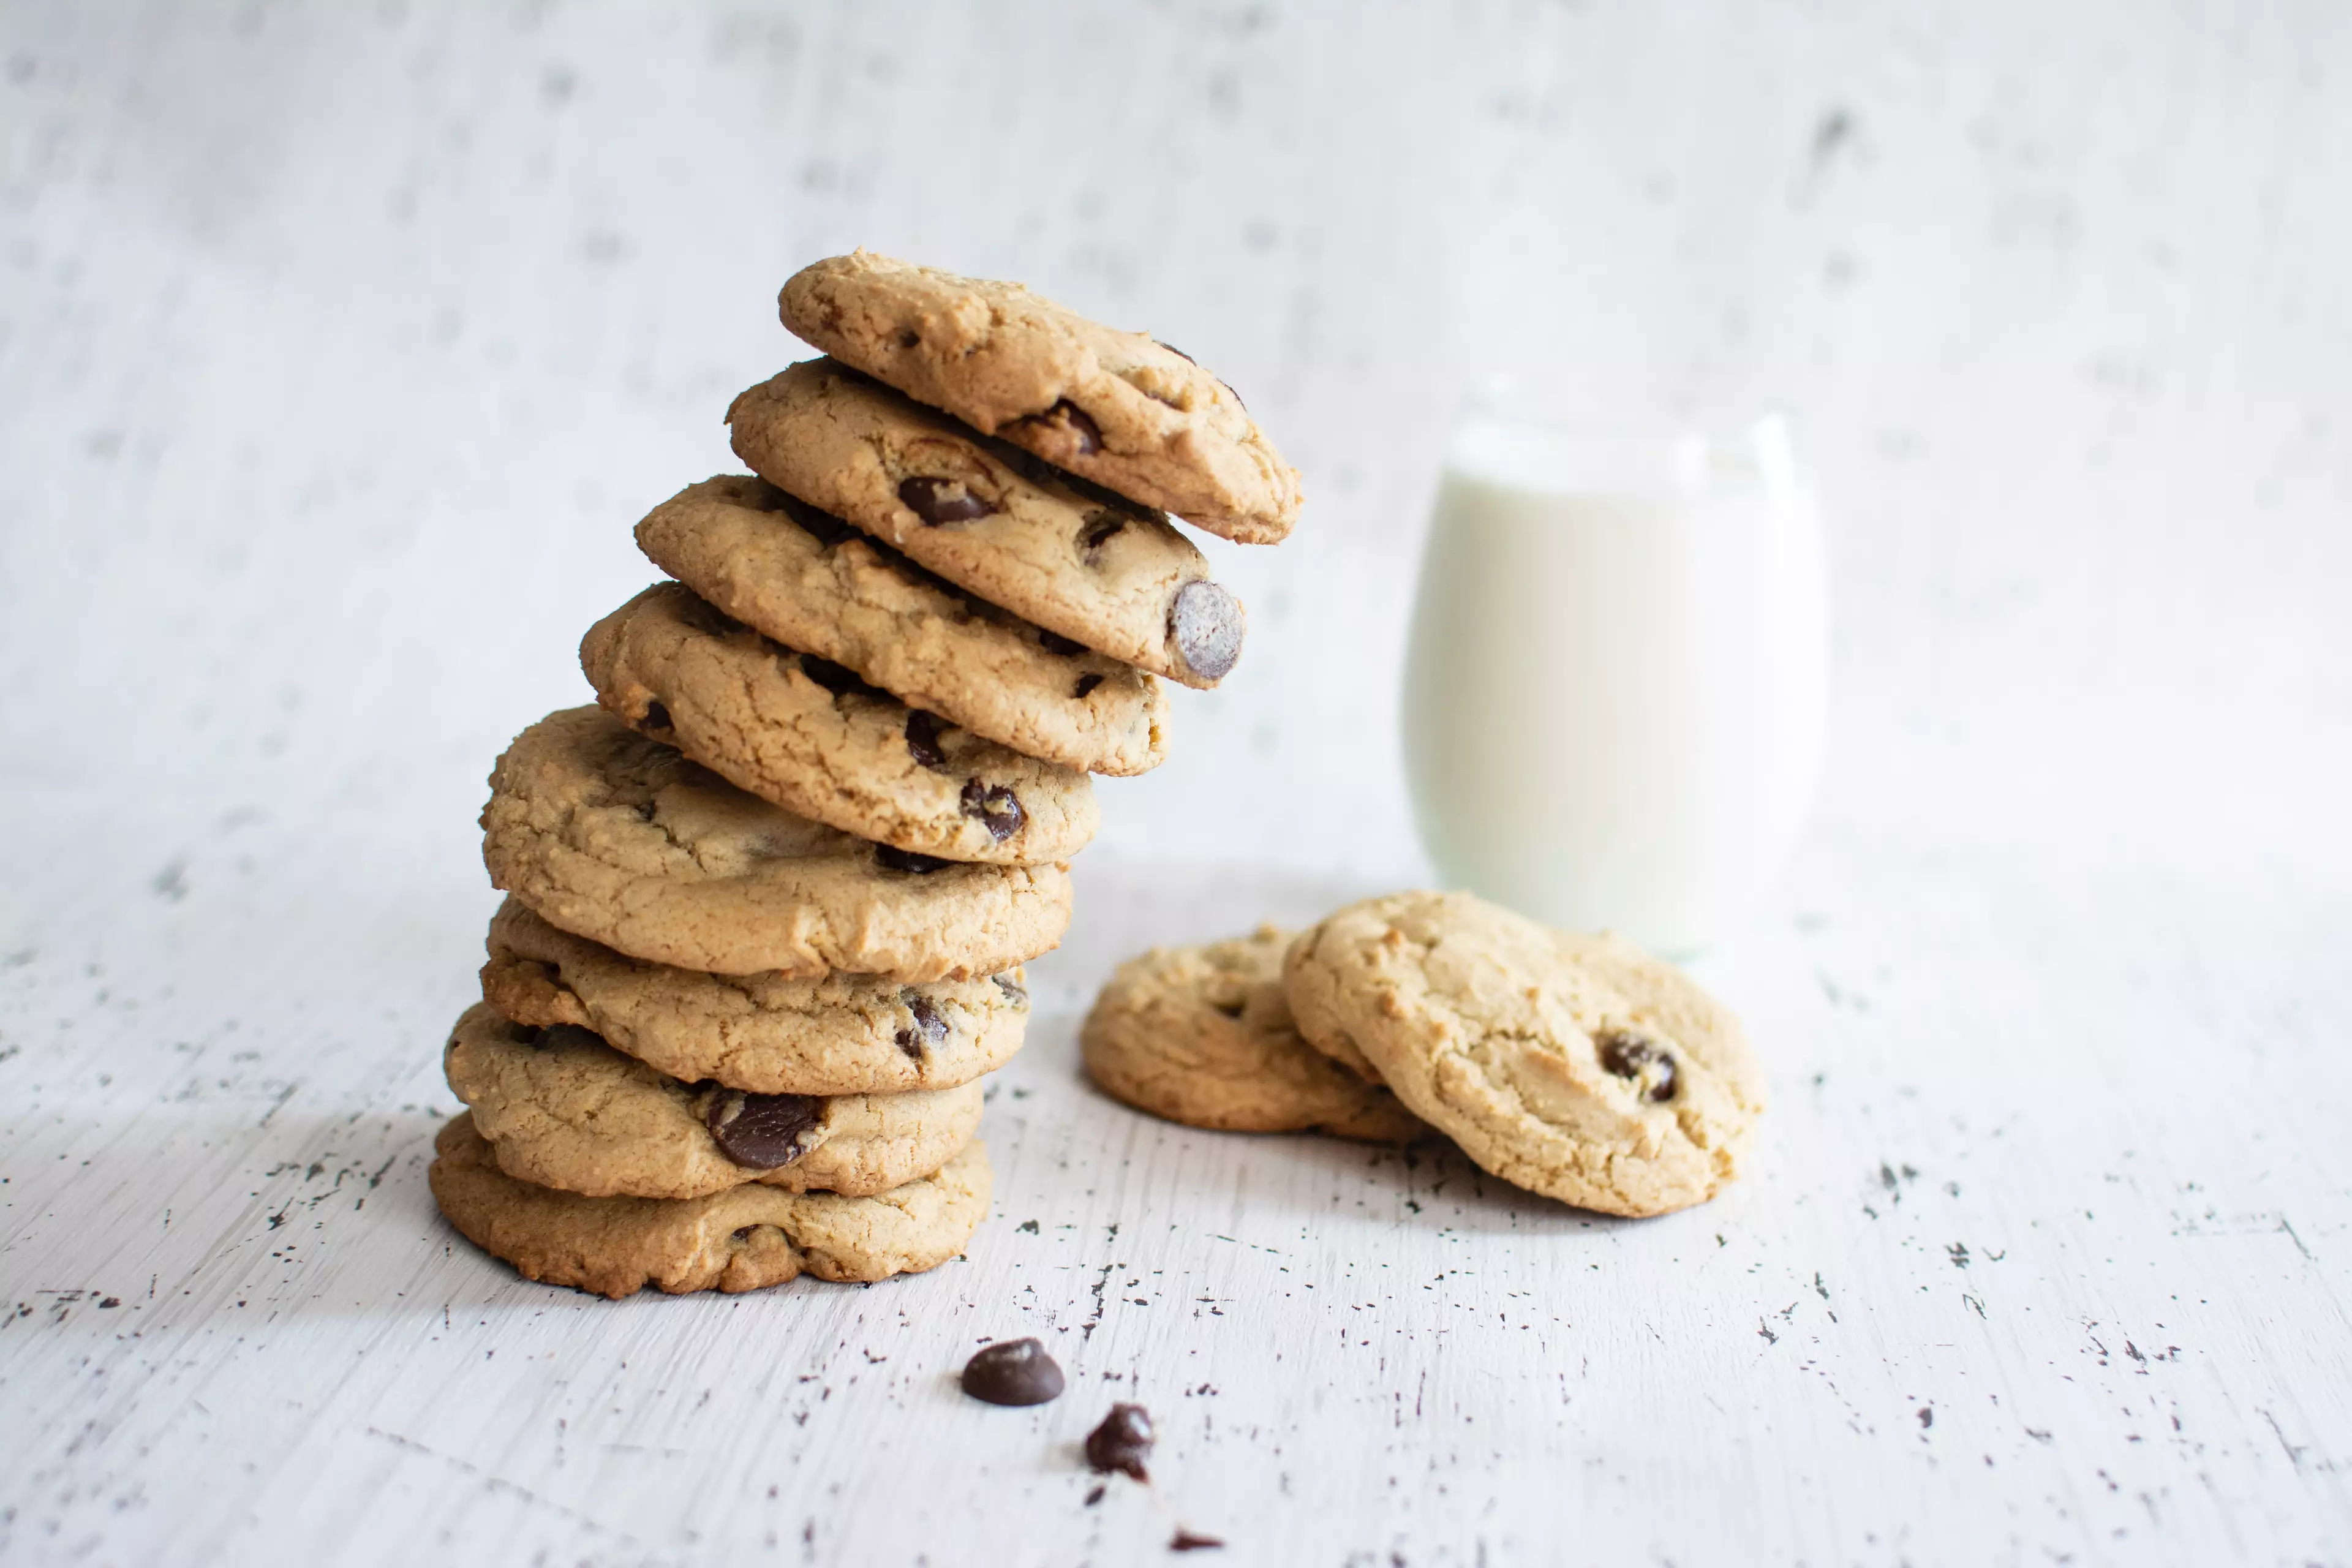 We can't wait to get our hands on some new cookie flavours (